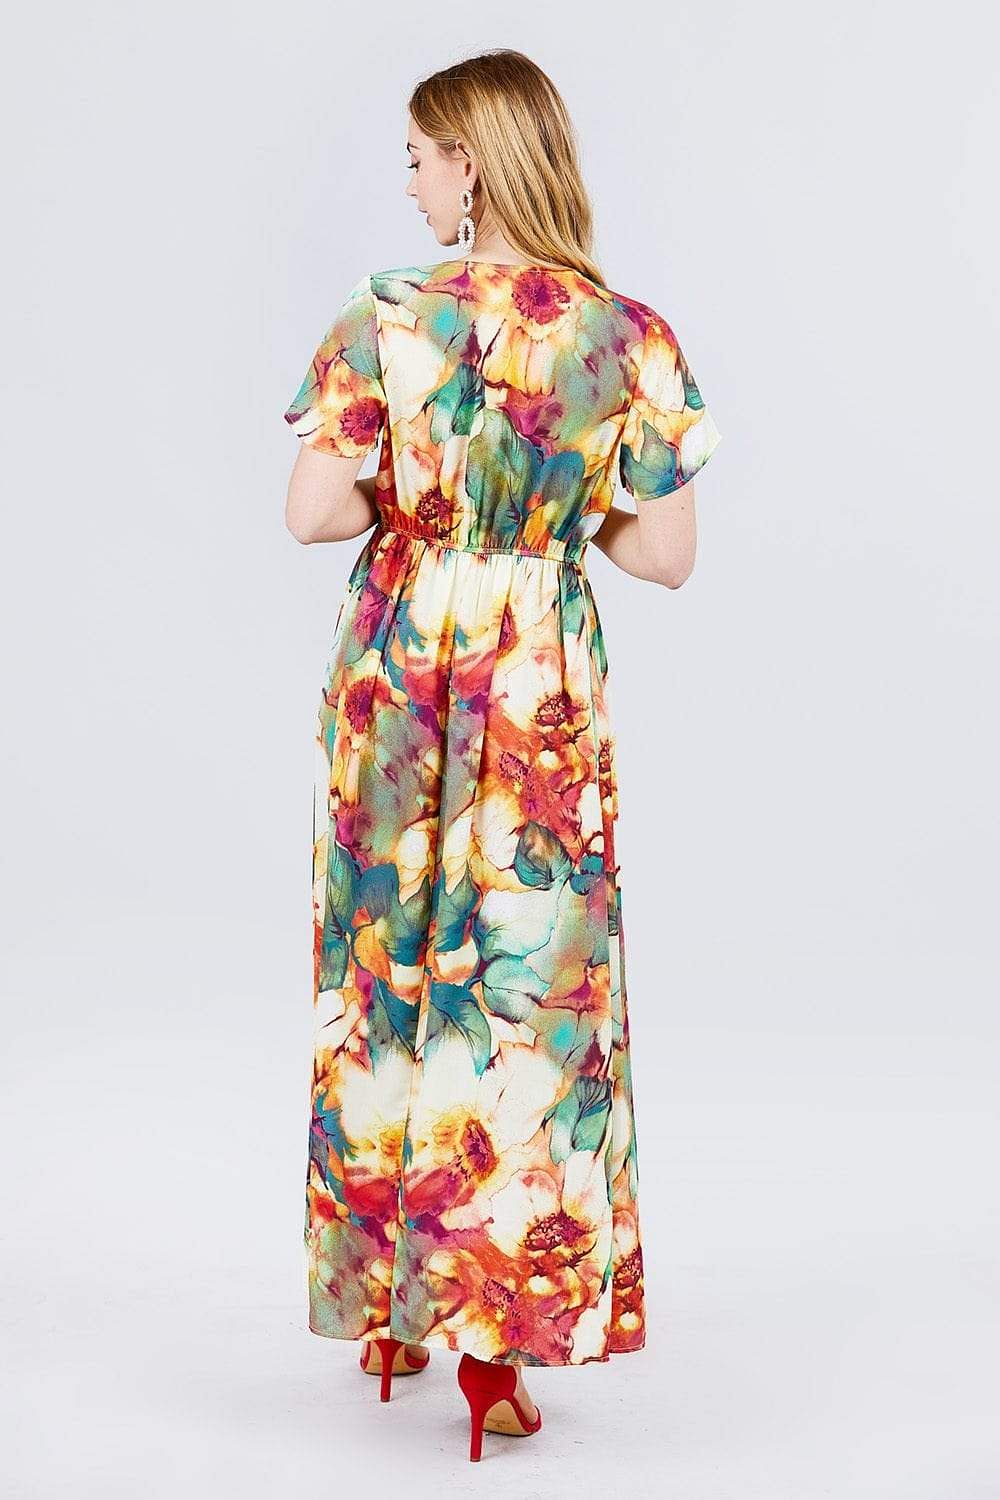 Green Short Sleeve V-Neck Floral Maxi Dress - Shopping Therapy S dress